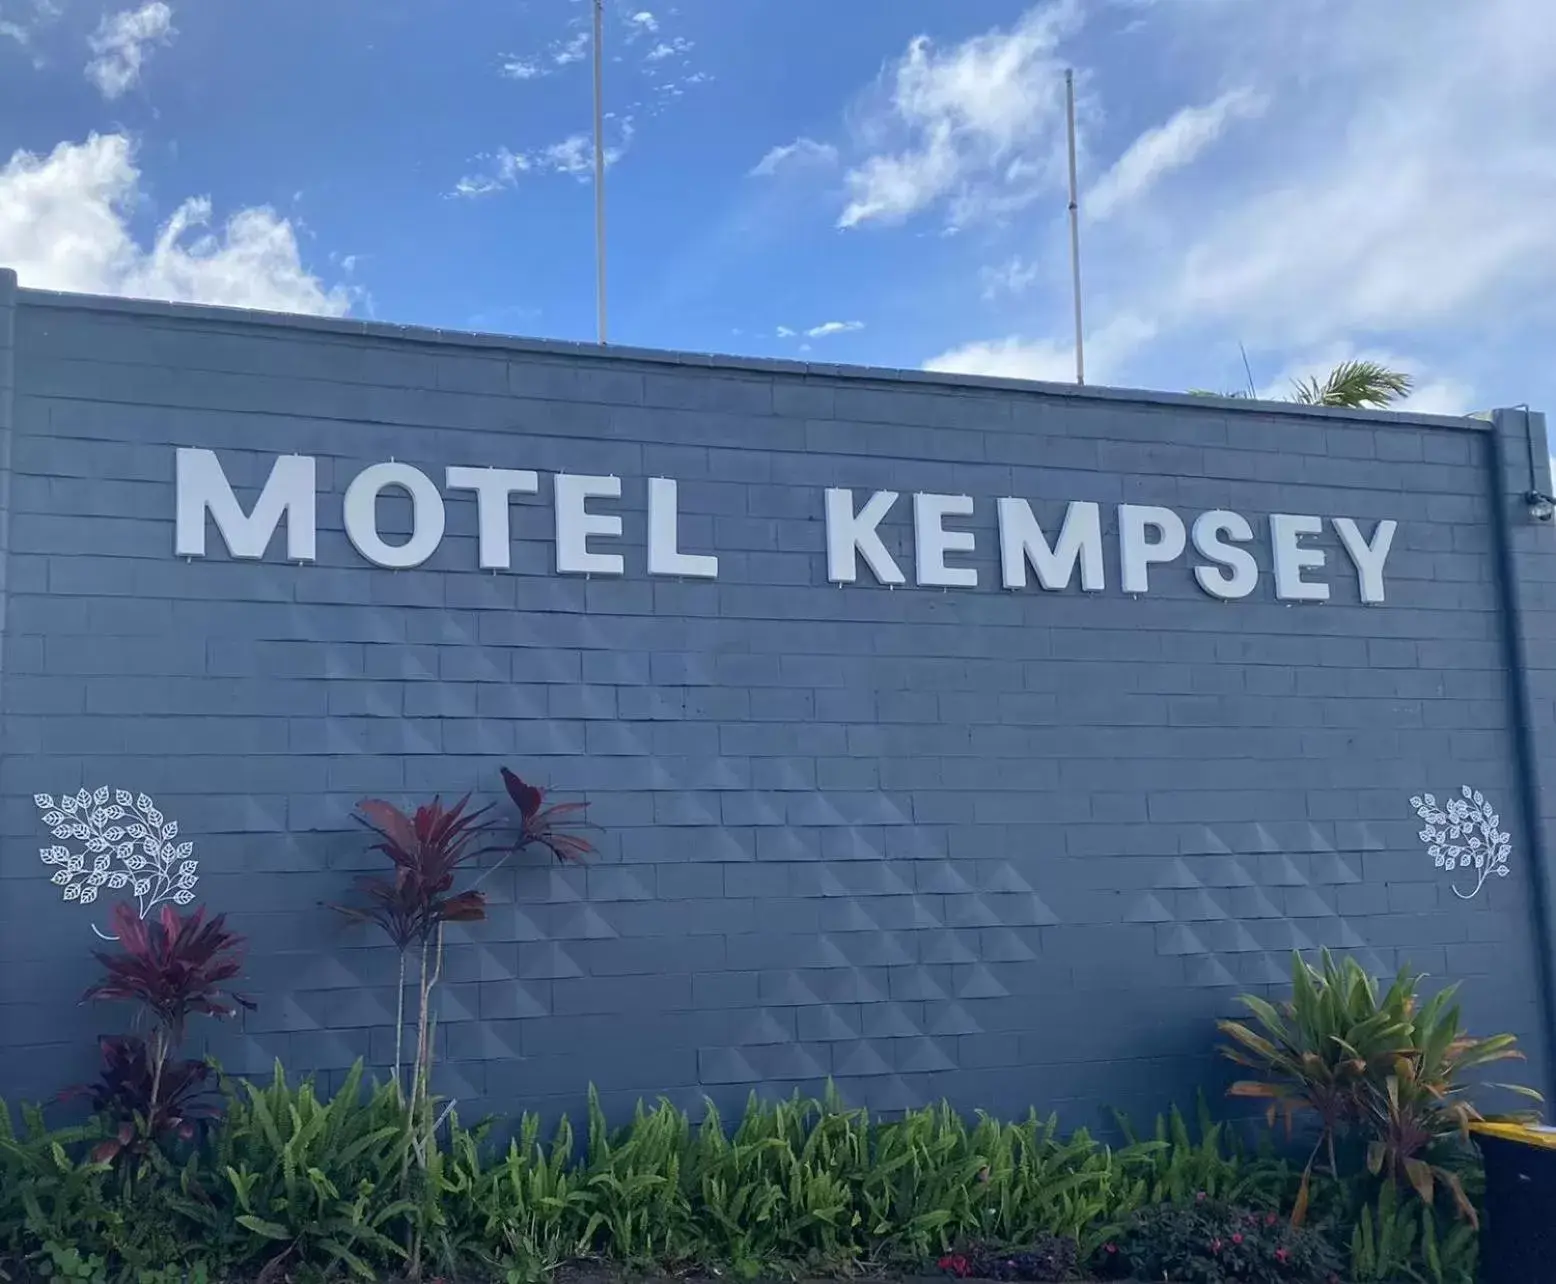 Property building in Motel Kempsey